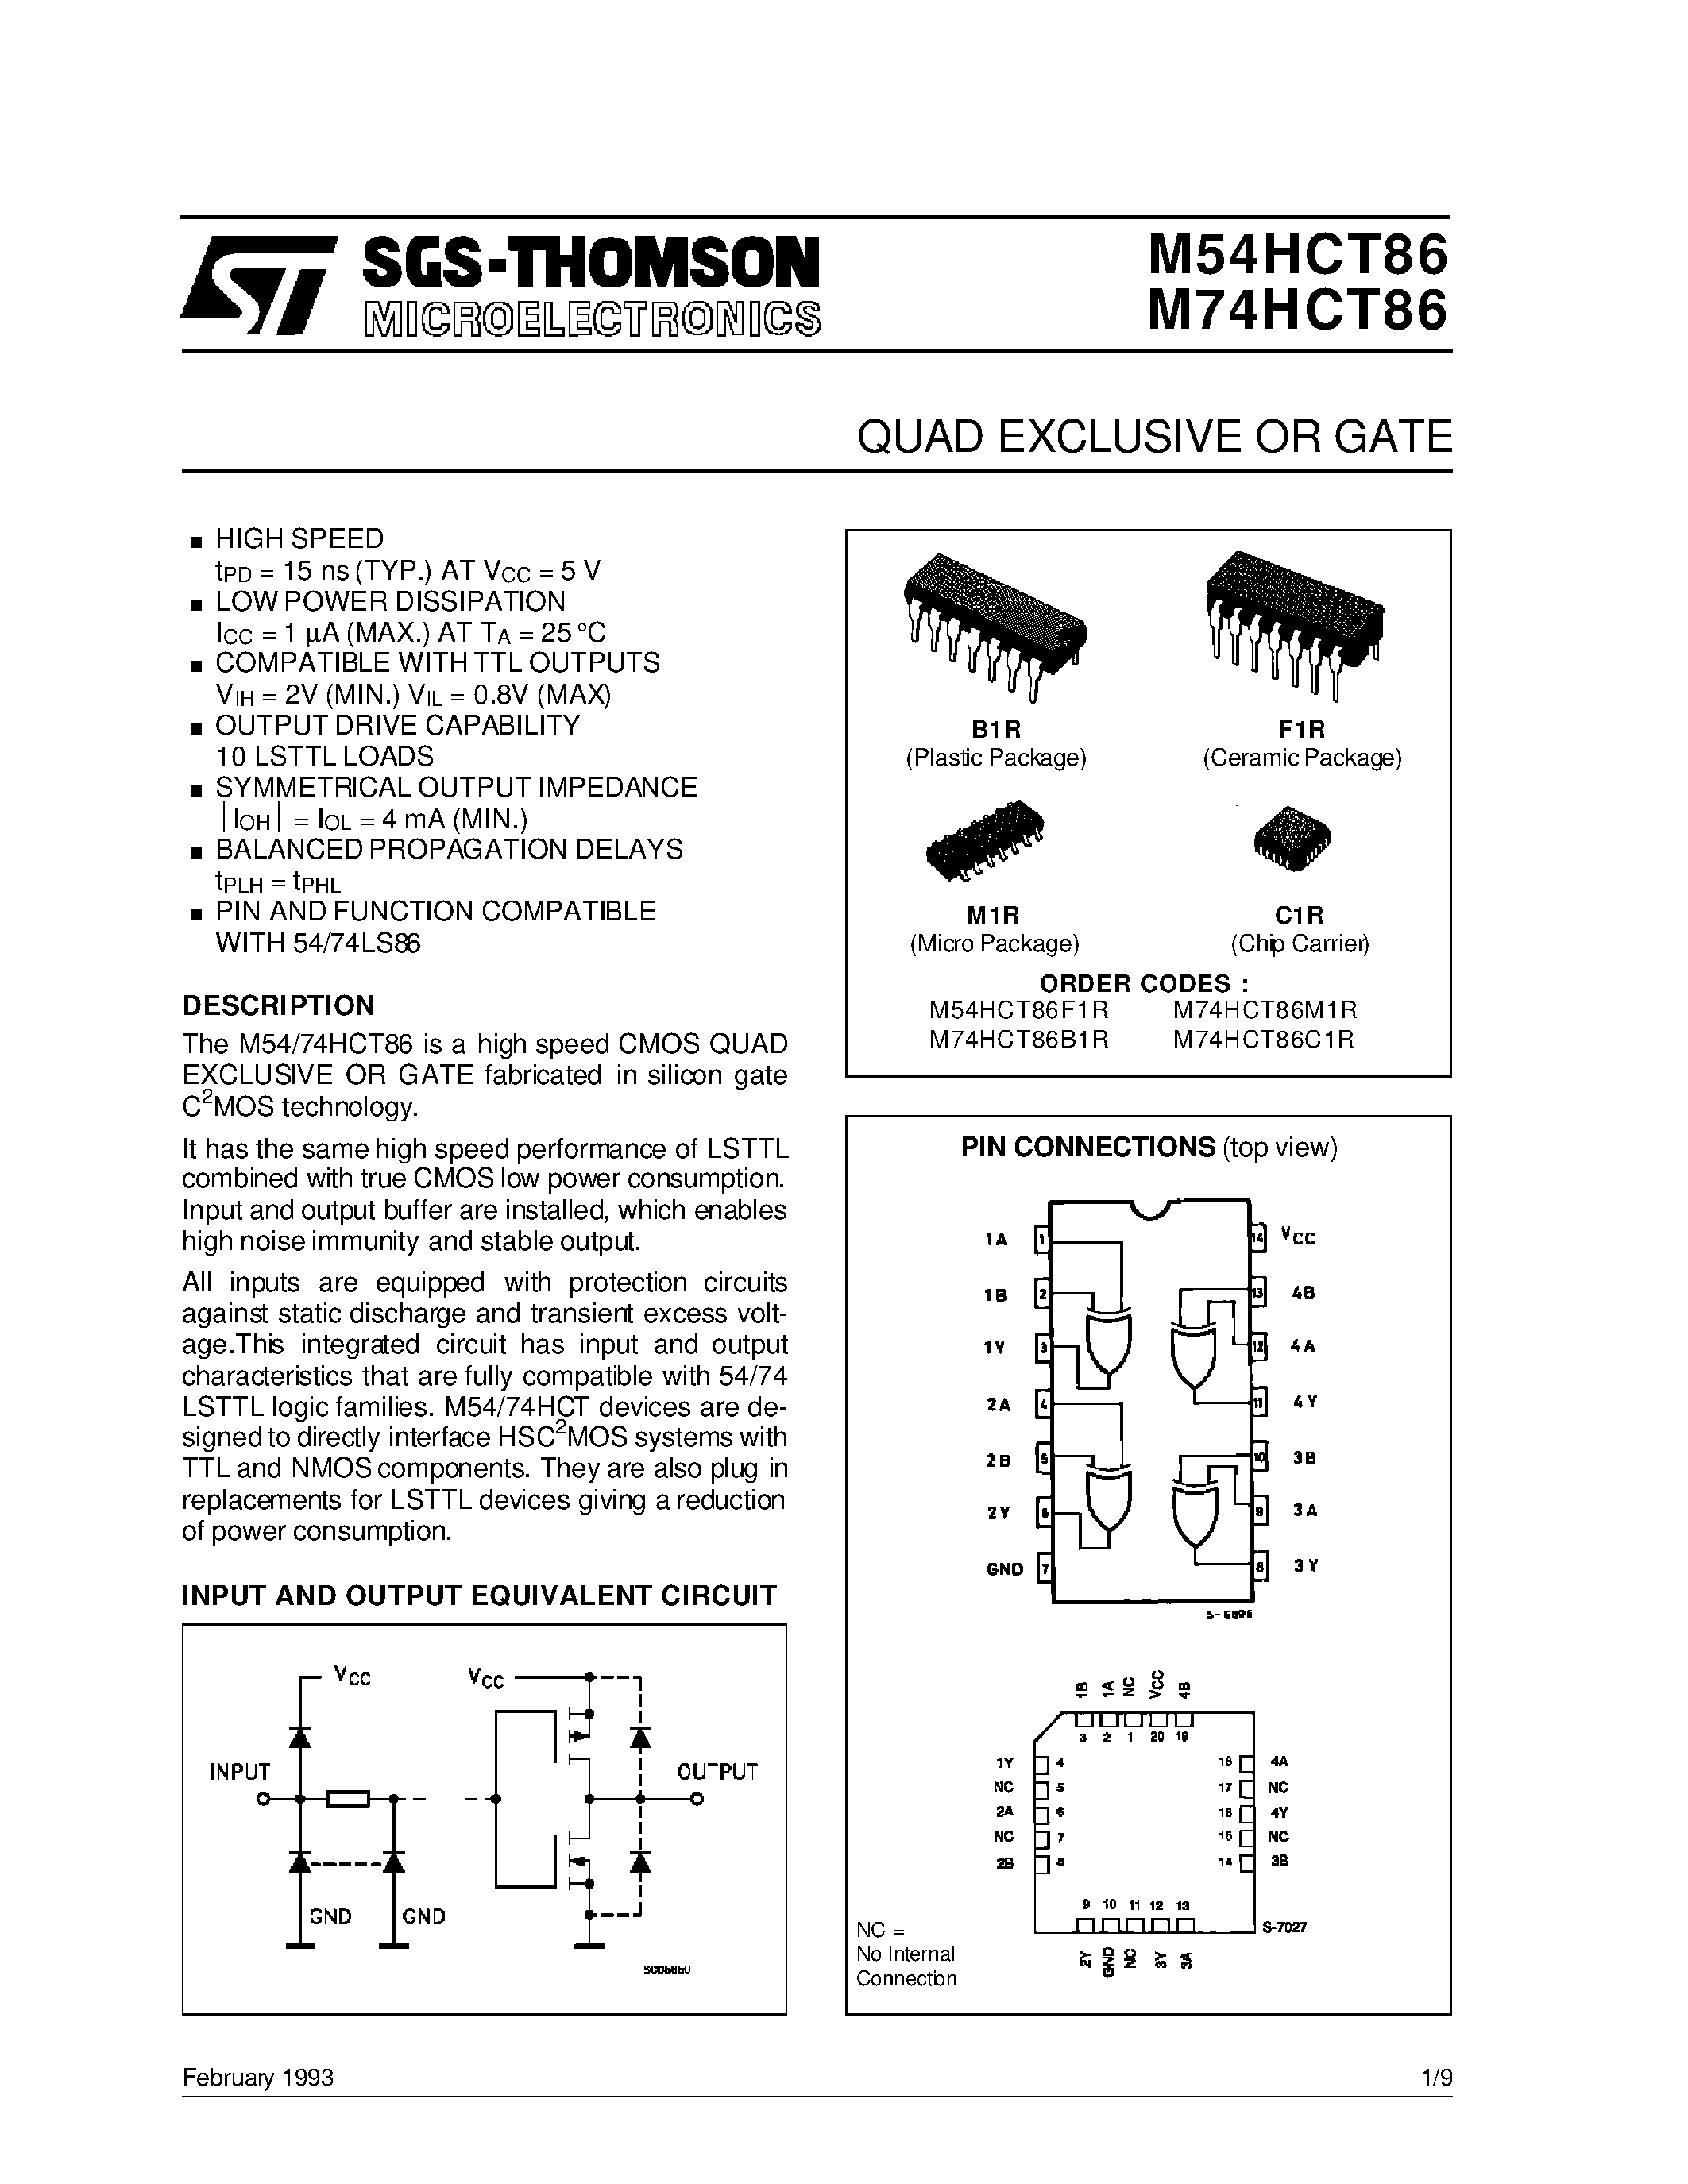 Datasheet M74HCT86 - QUAD EXCLUSIVE OR GATE page 1